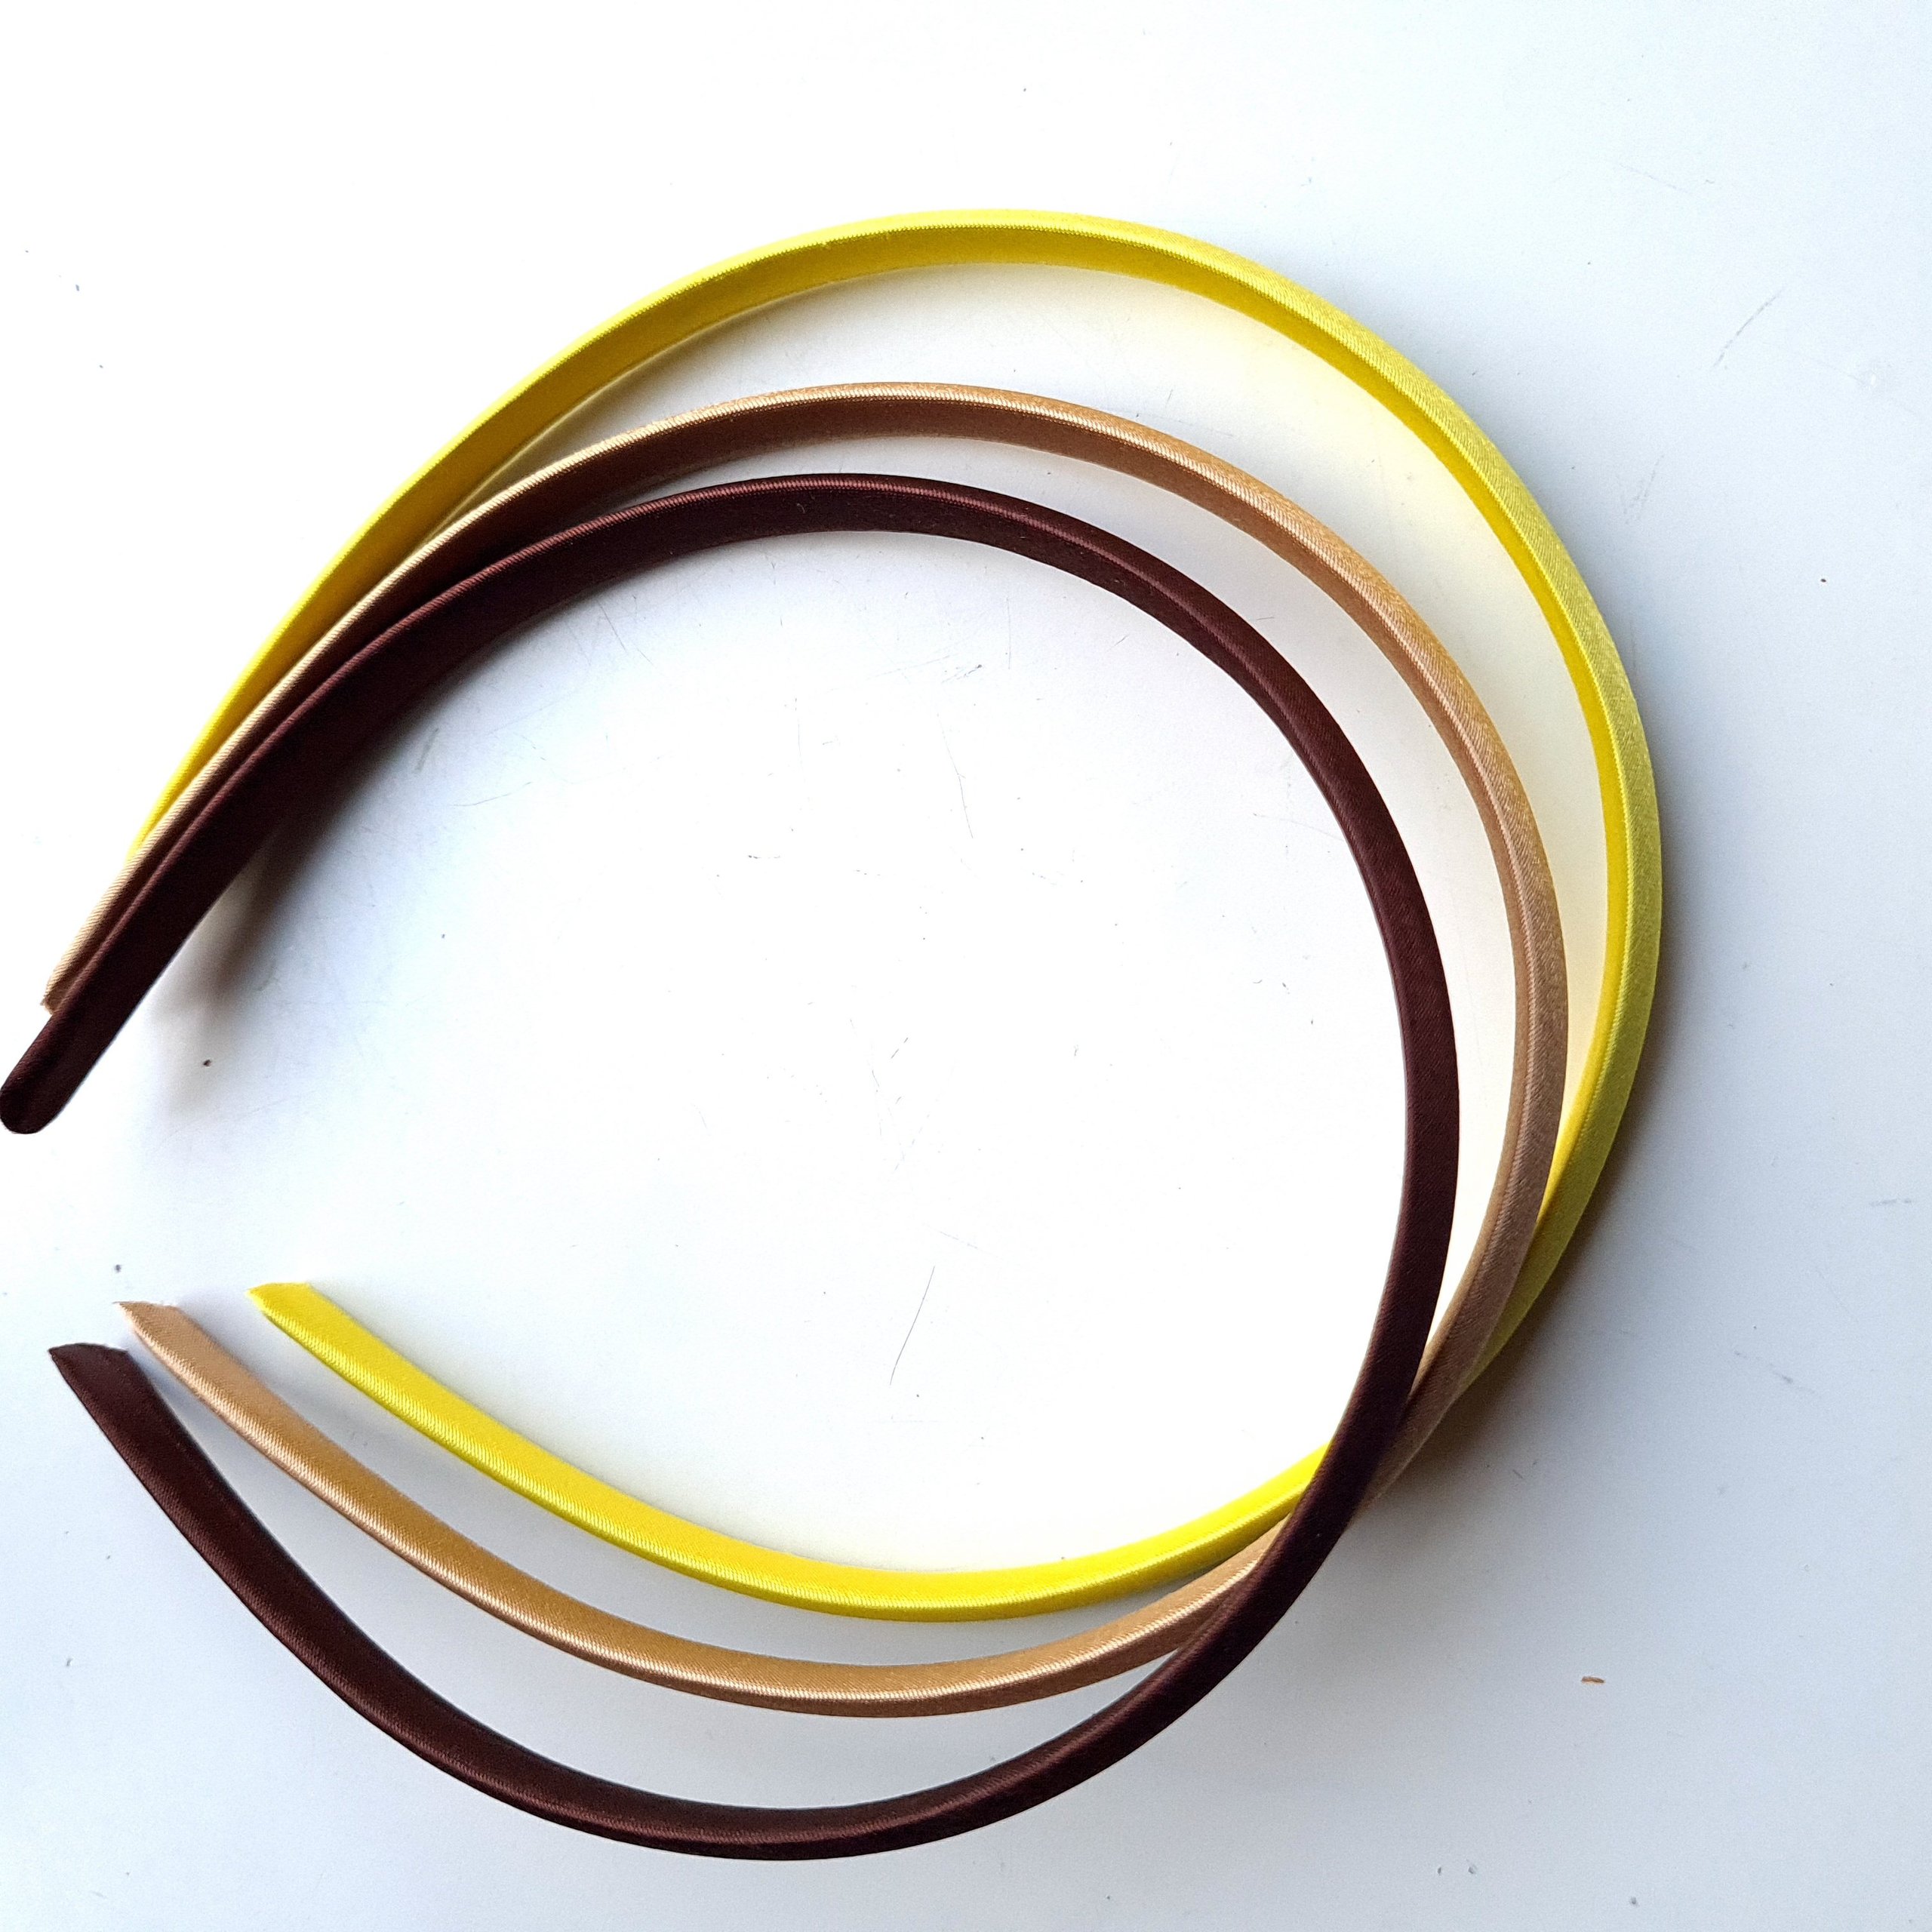 Hair Bands in Brown & Yellow Tones